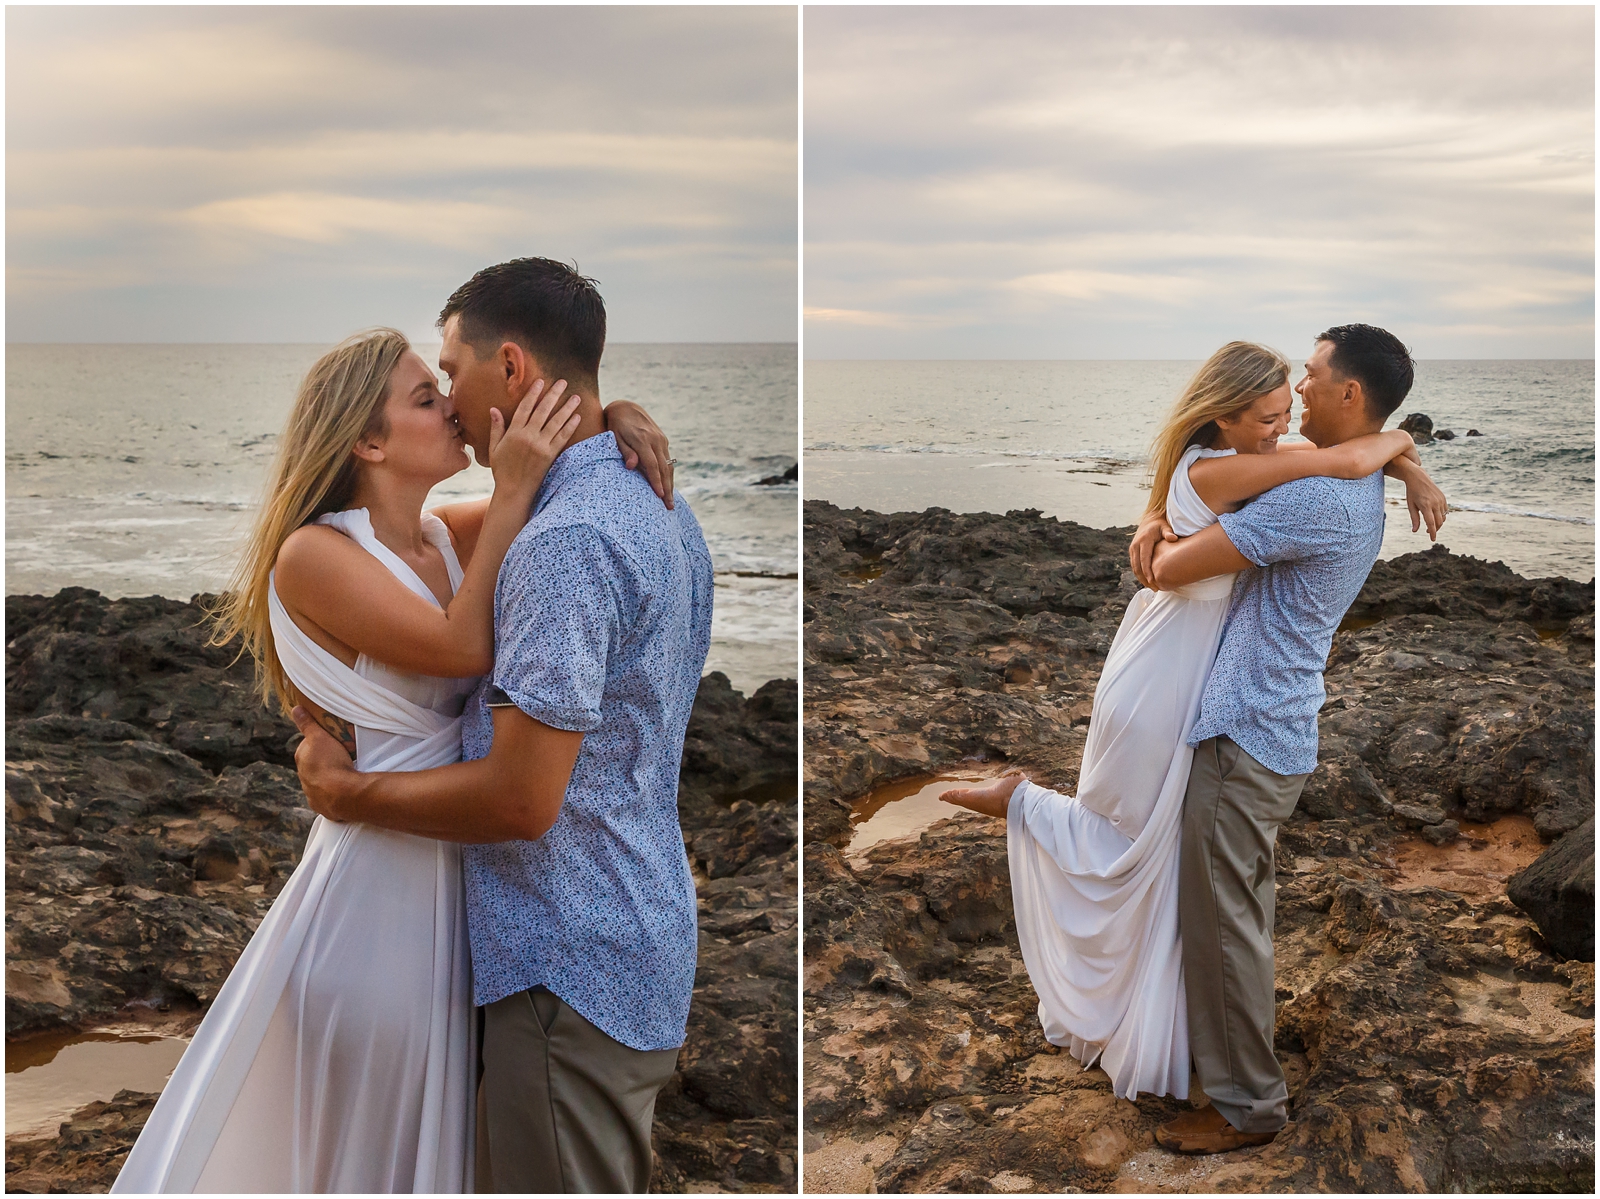 This couple eloped at sunset on Oahu, Hawaii.